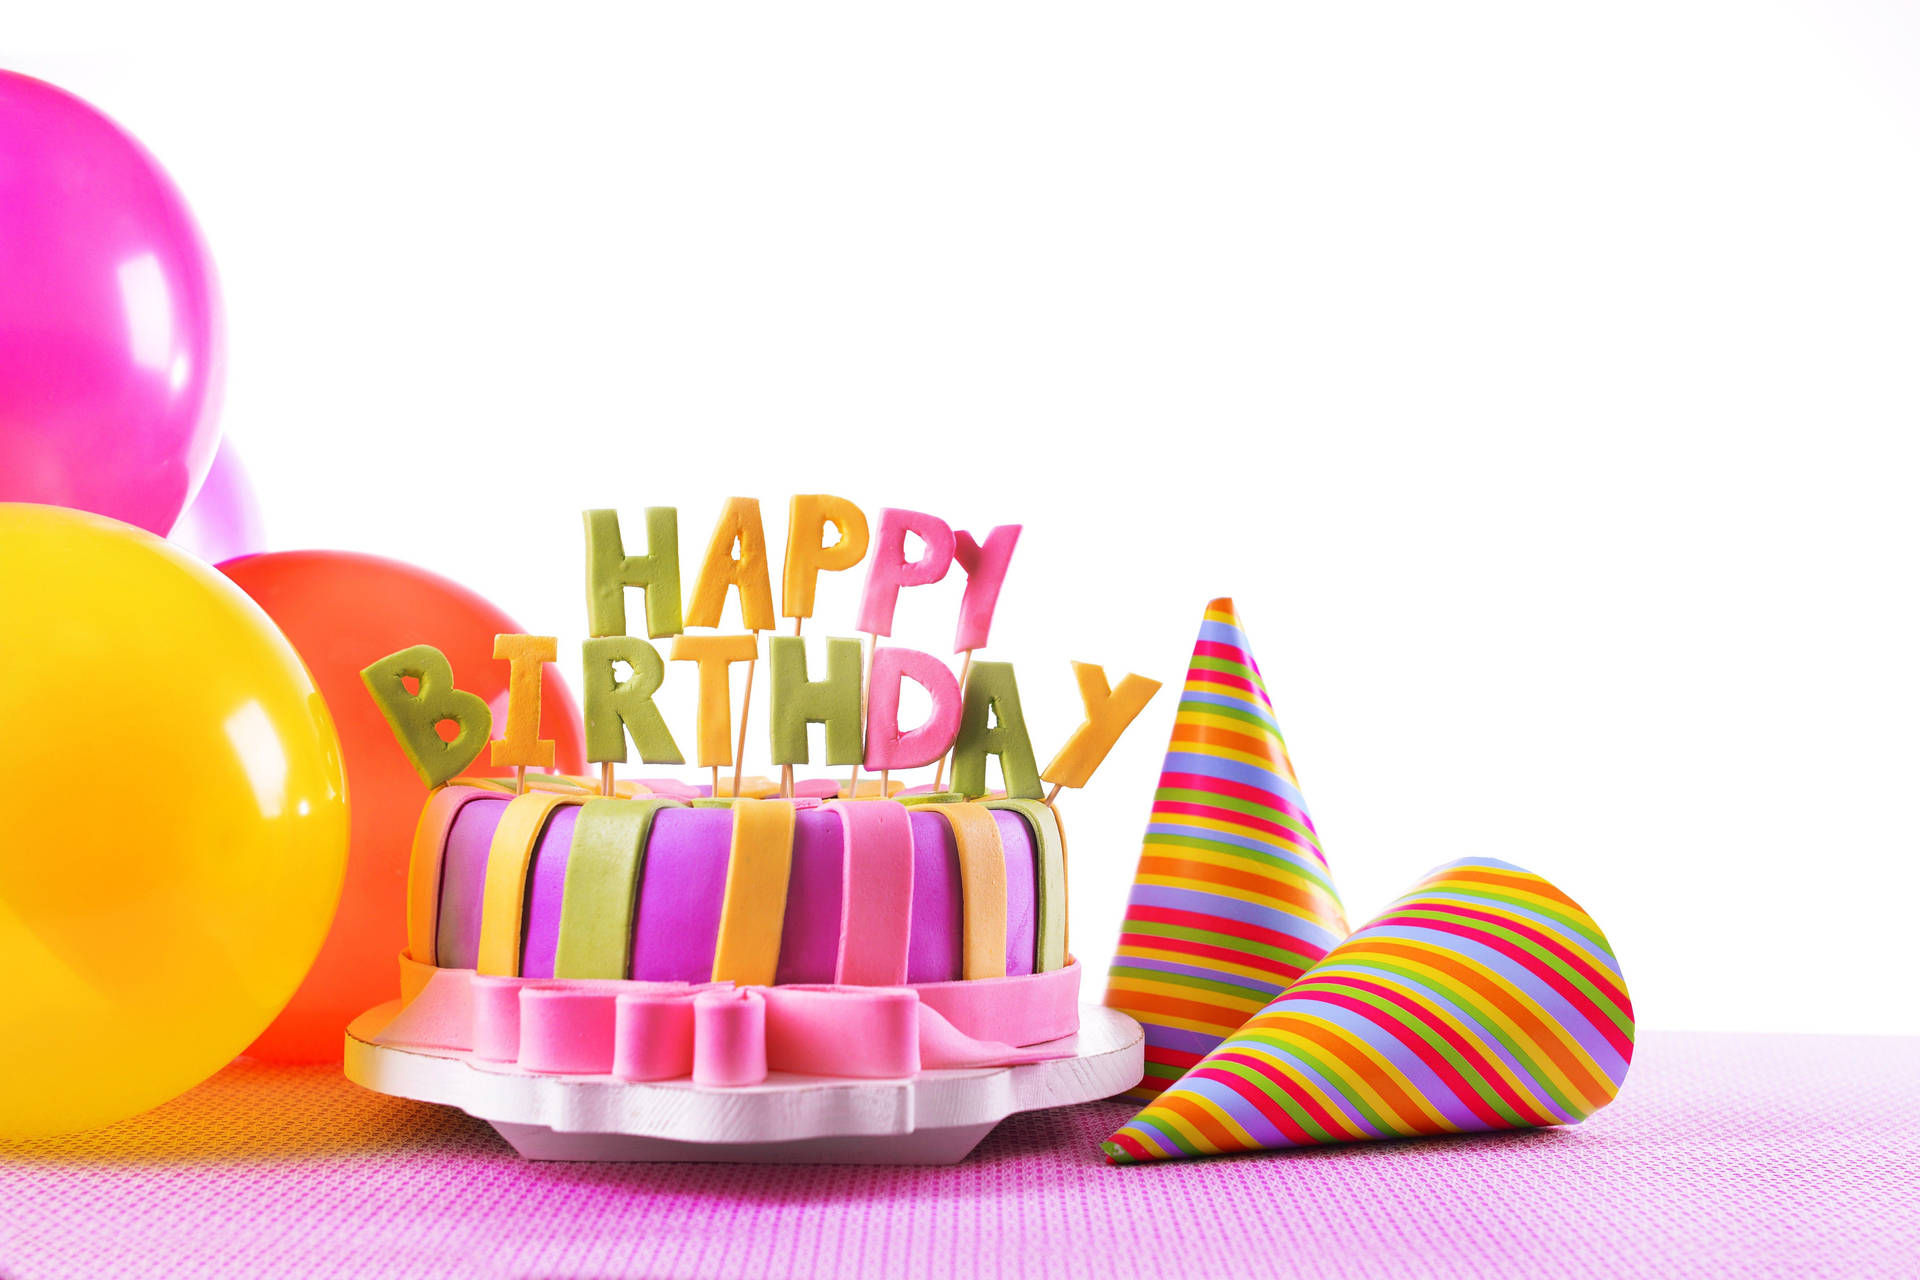 Happy Birthday Letters On Cake Background